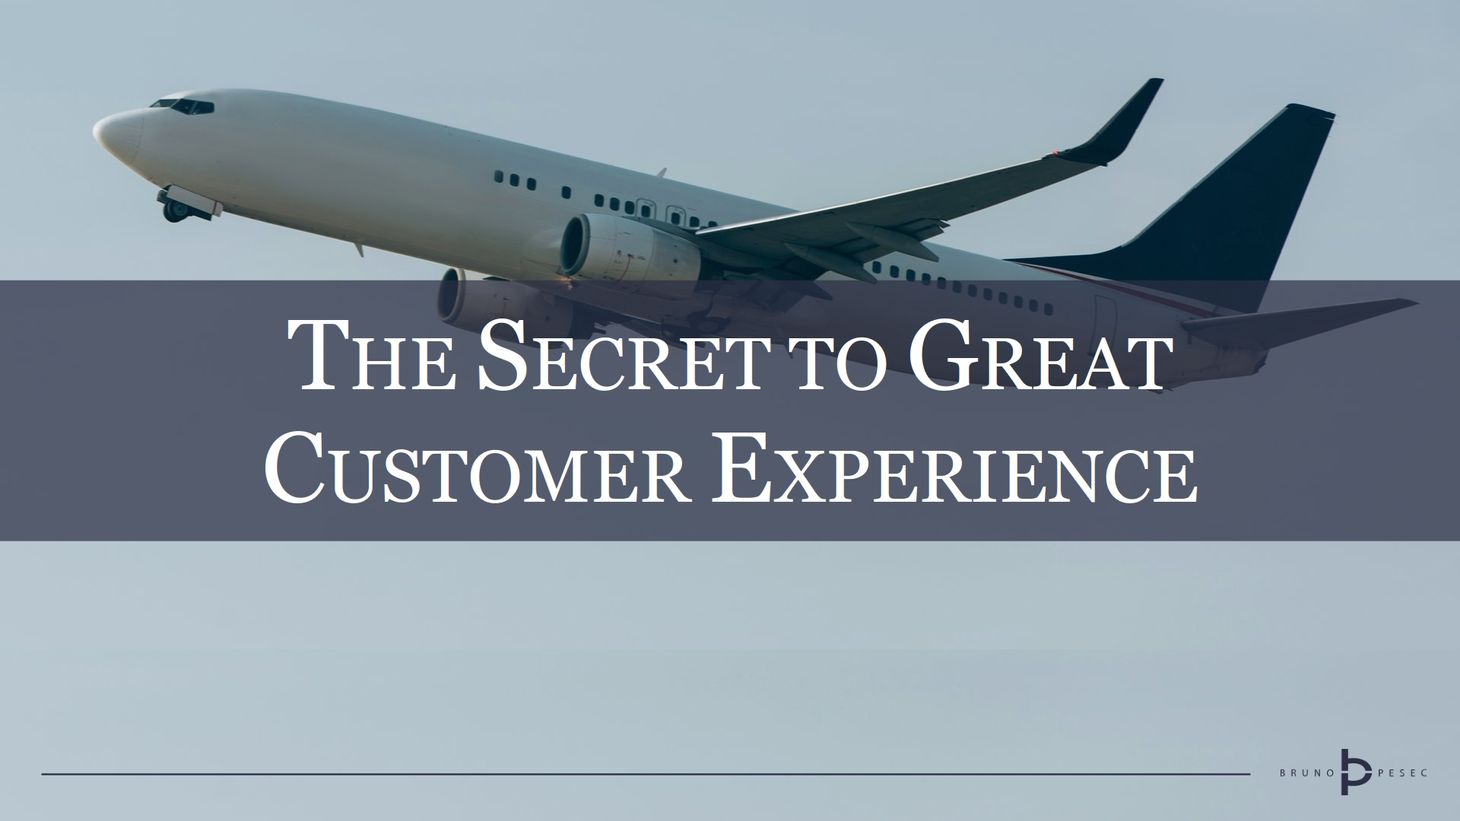 The secret to great customer experience